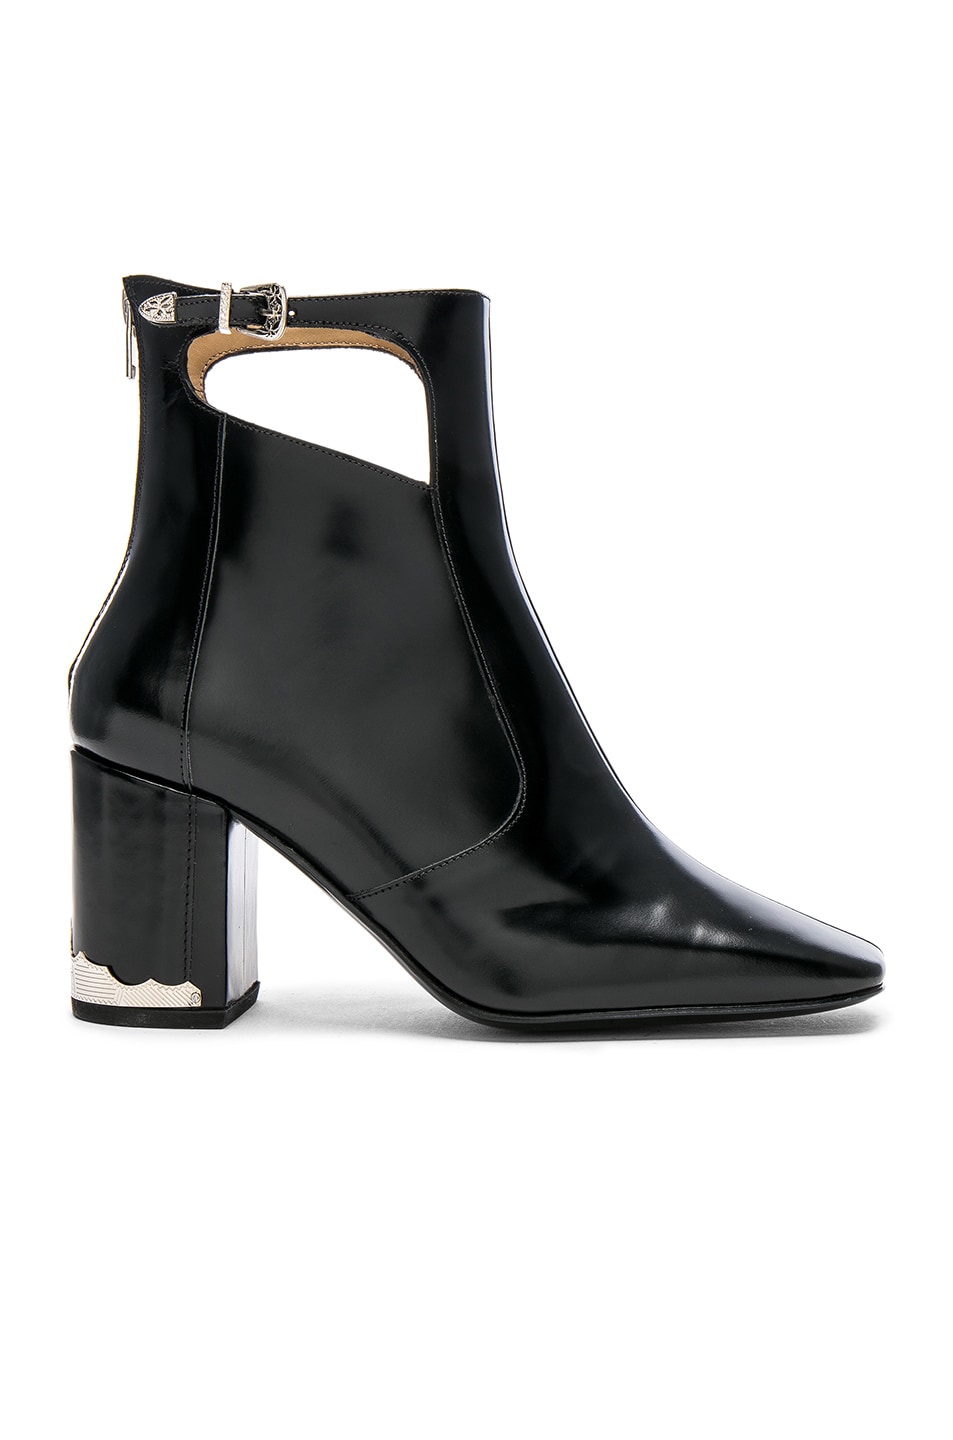 Image 1 of TOGA PULLA Leather Boots in Black Polido